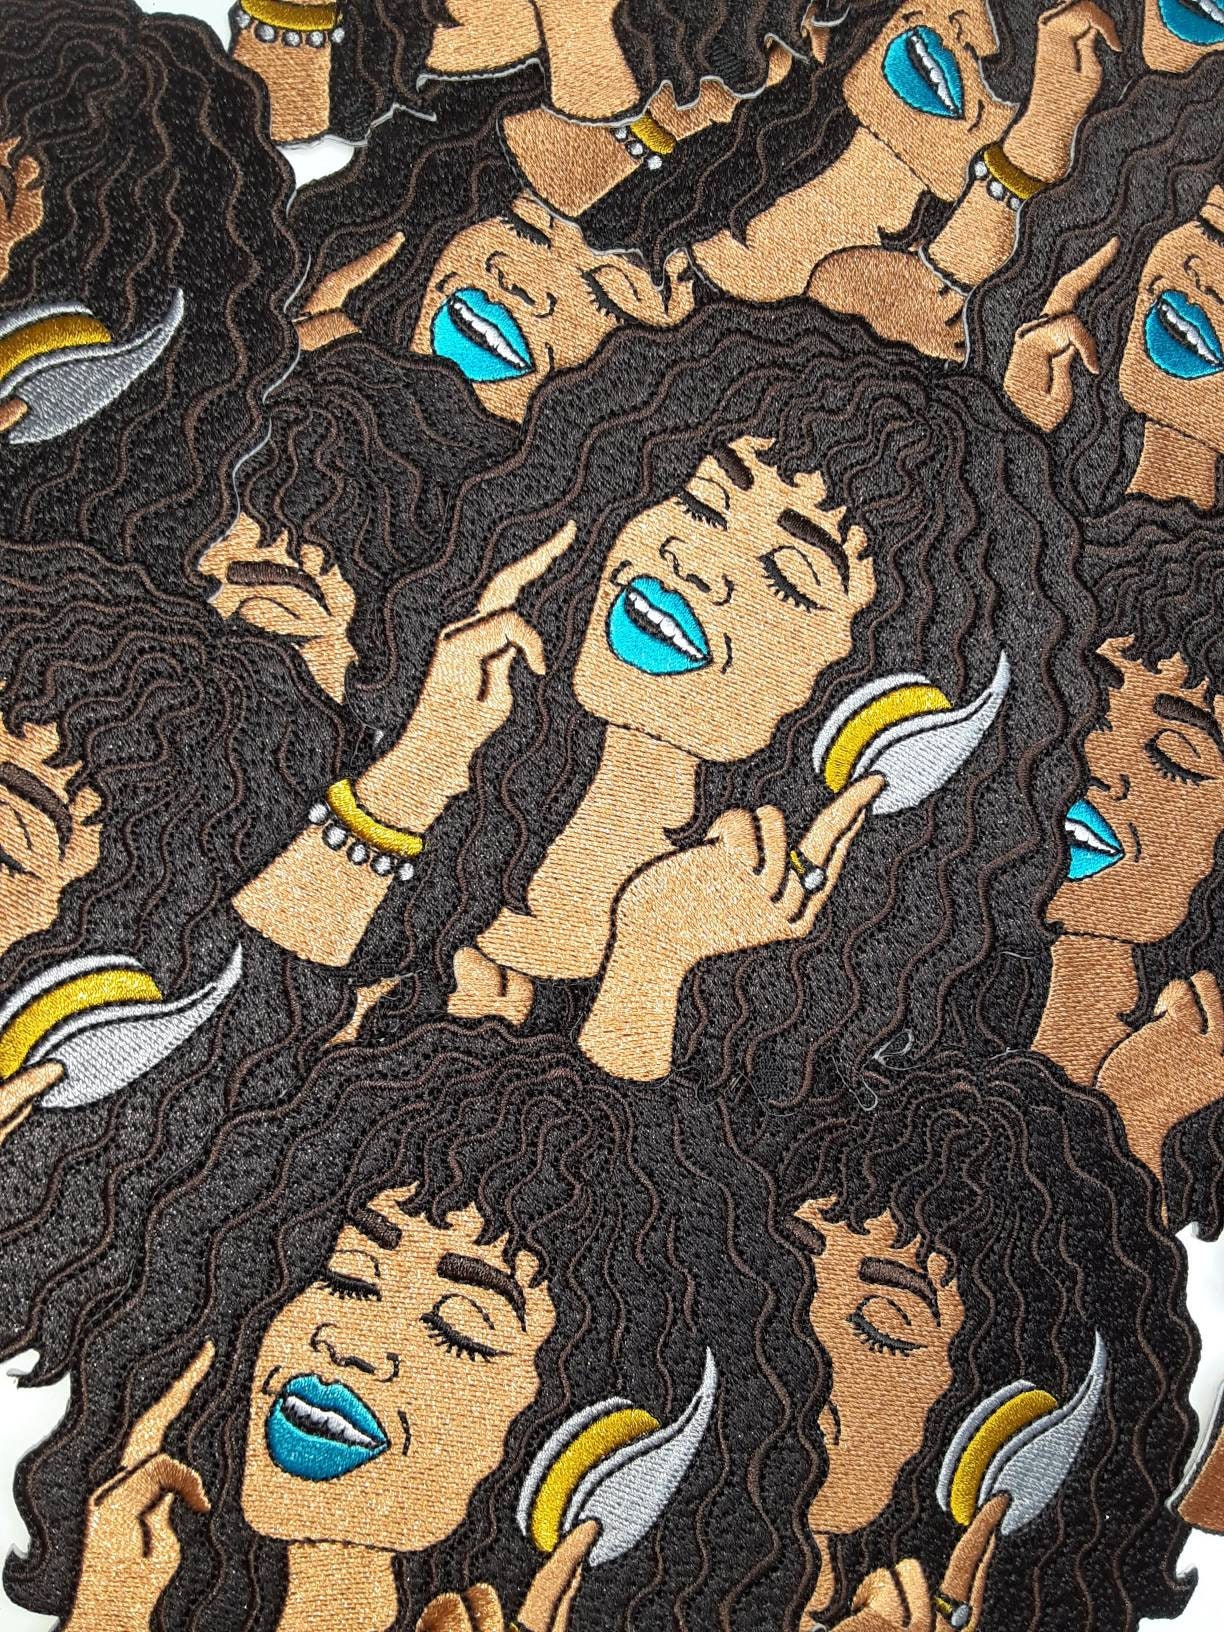 Sassy Chic "Groovin 2 Da Music" with Poppin Blue Lipgloss, Iron or Sew-on Embroidered 3D Afrocentric Patch, Exclusive Appliques, Size 4.5"